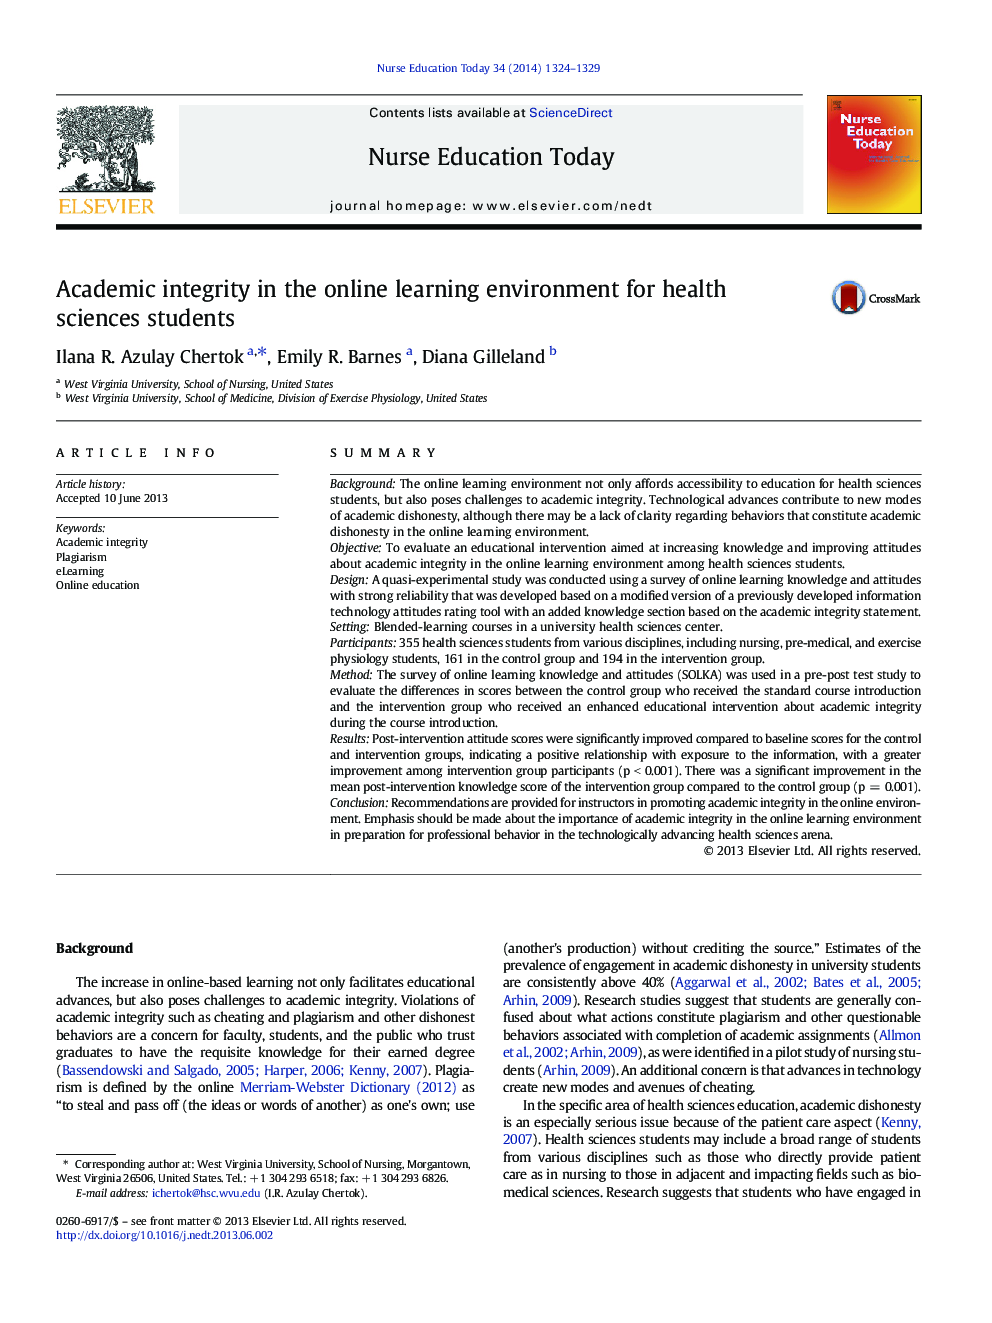 Academic integrity in the online learning environment for health sciences students